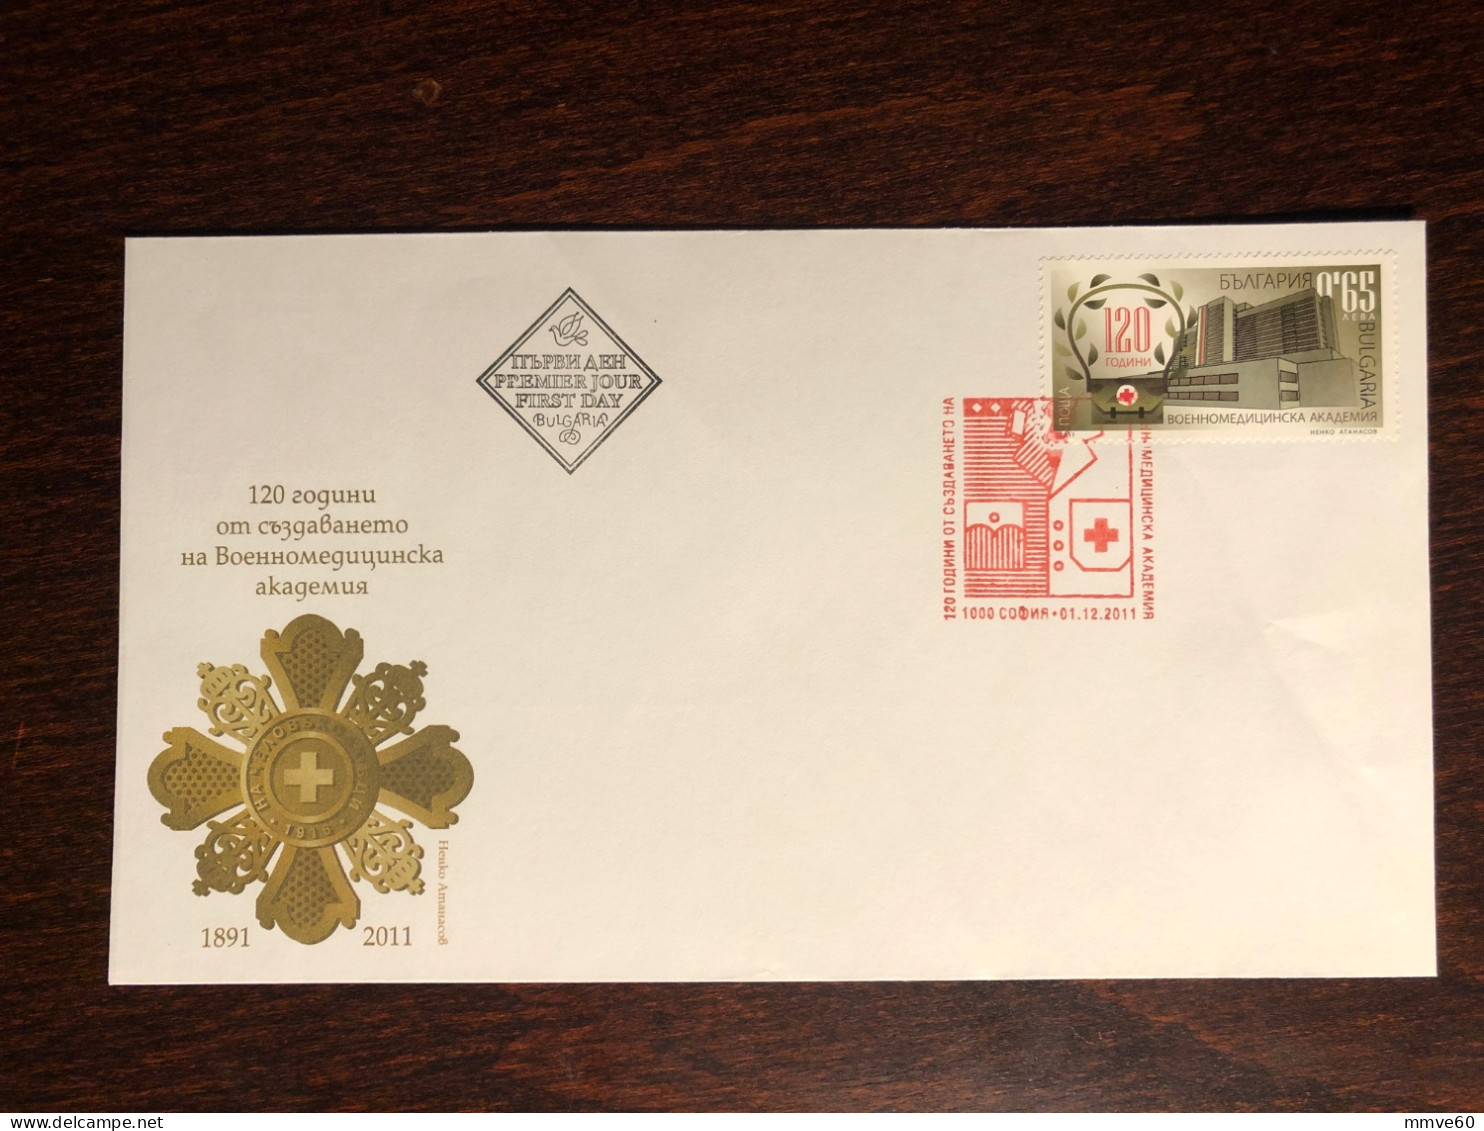 BULGARIA FDC COVER 2011 YEAR MEDICAL MILITARY ACADEMY HEALTH MEDICINE STAMP - Covers & Documents